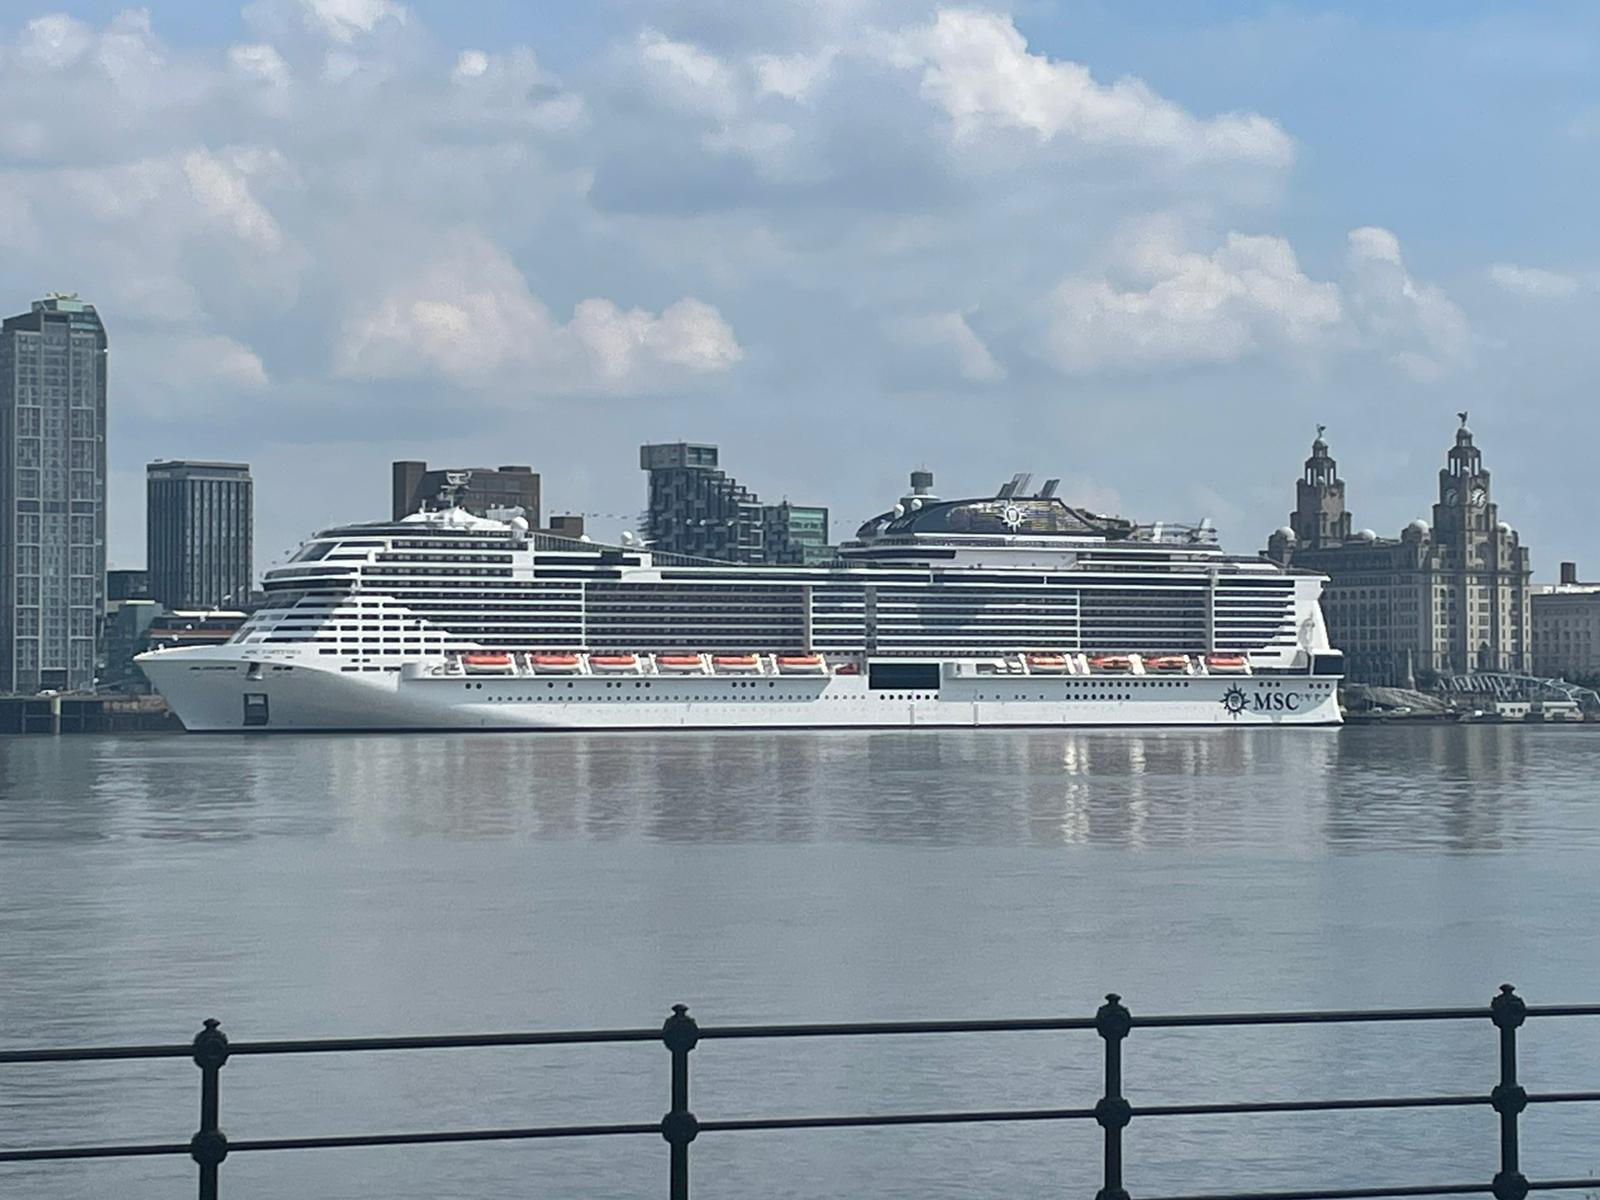 The MSC Virtuosa cruise ship arrived in the River Mersey on Tuesday morning